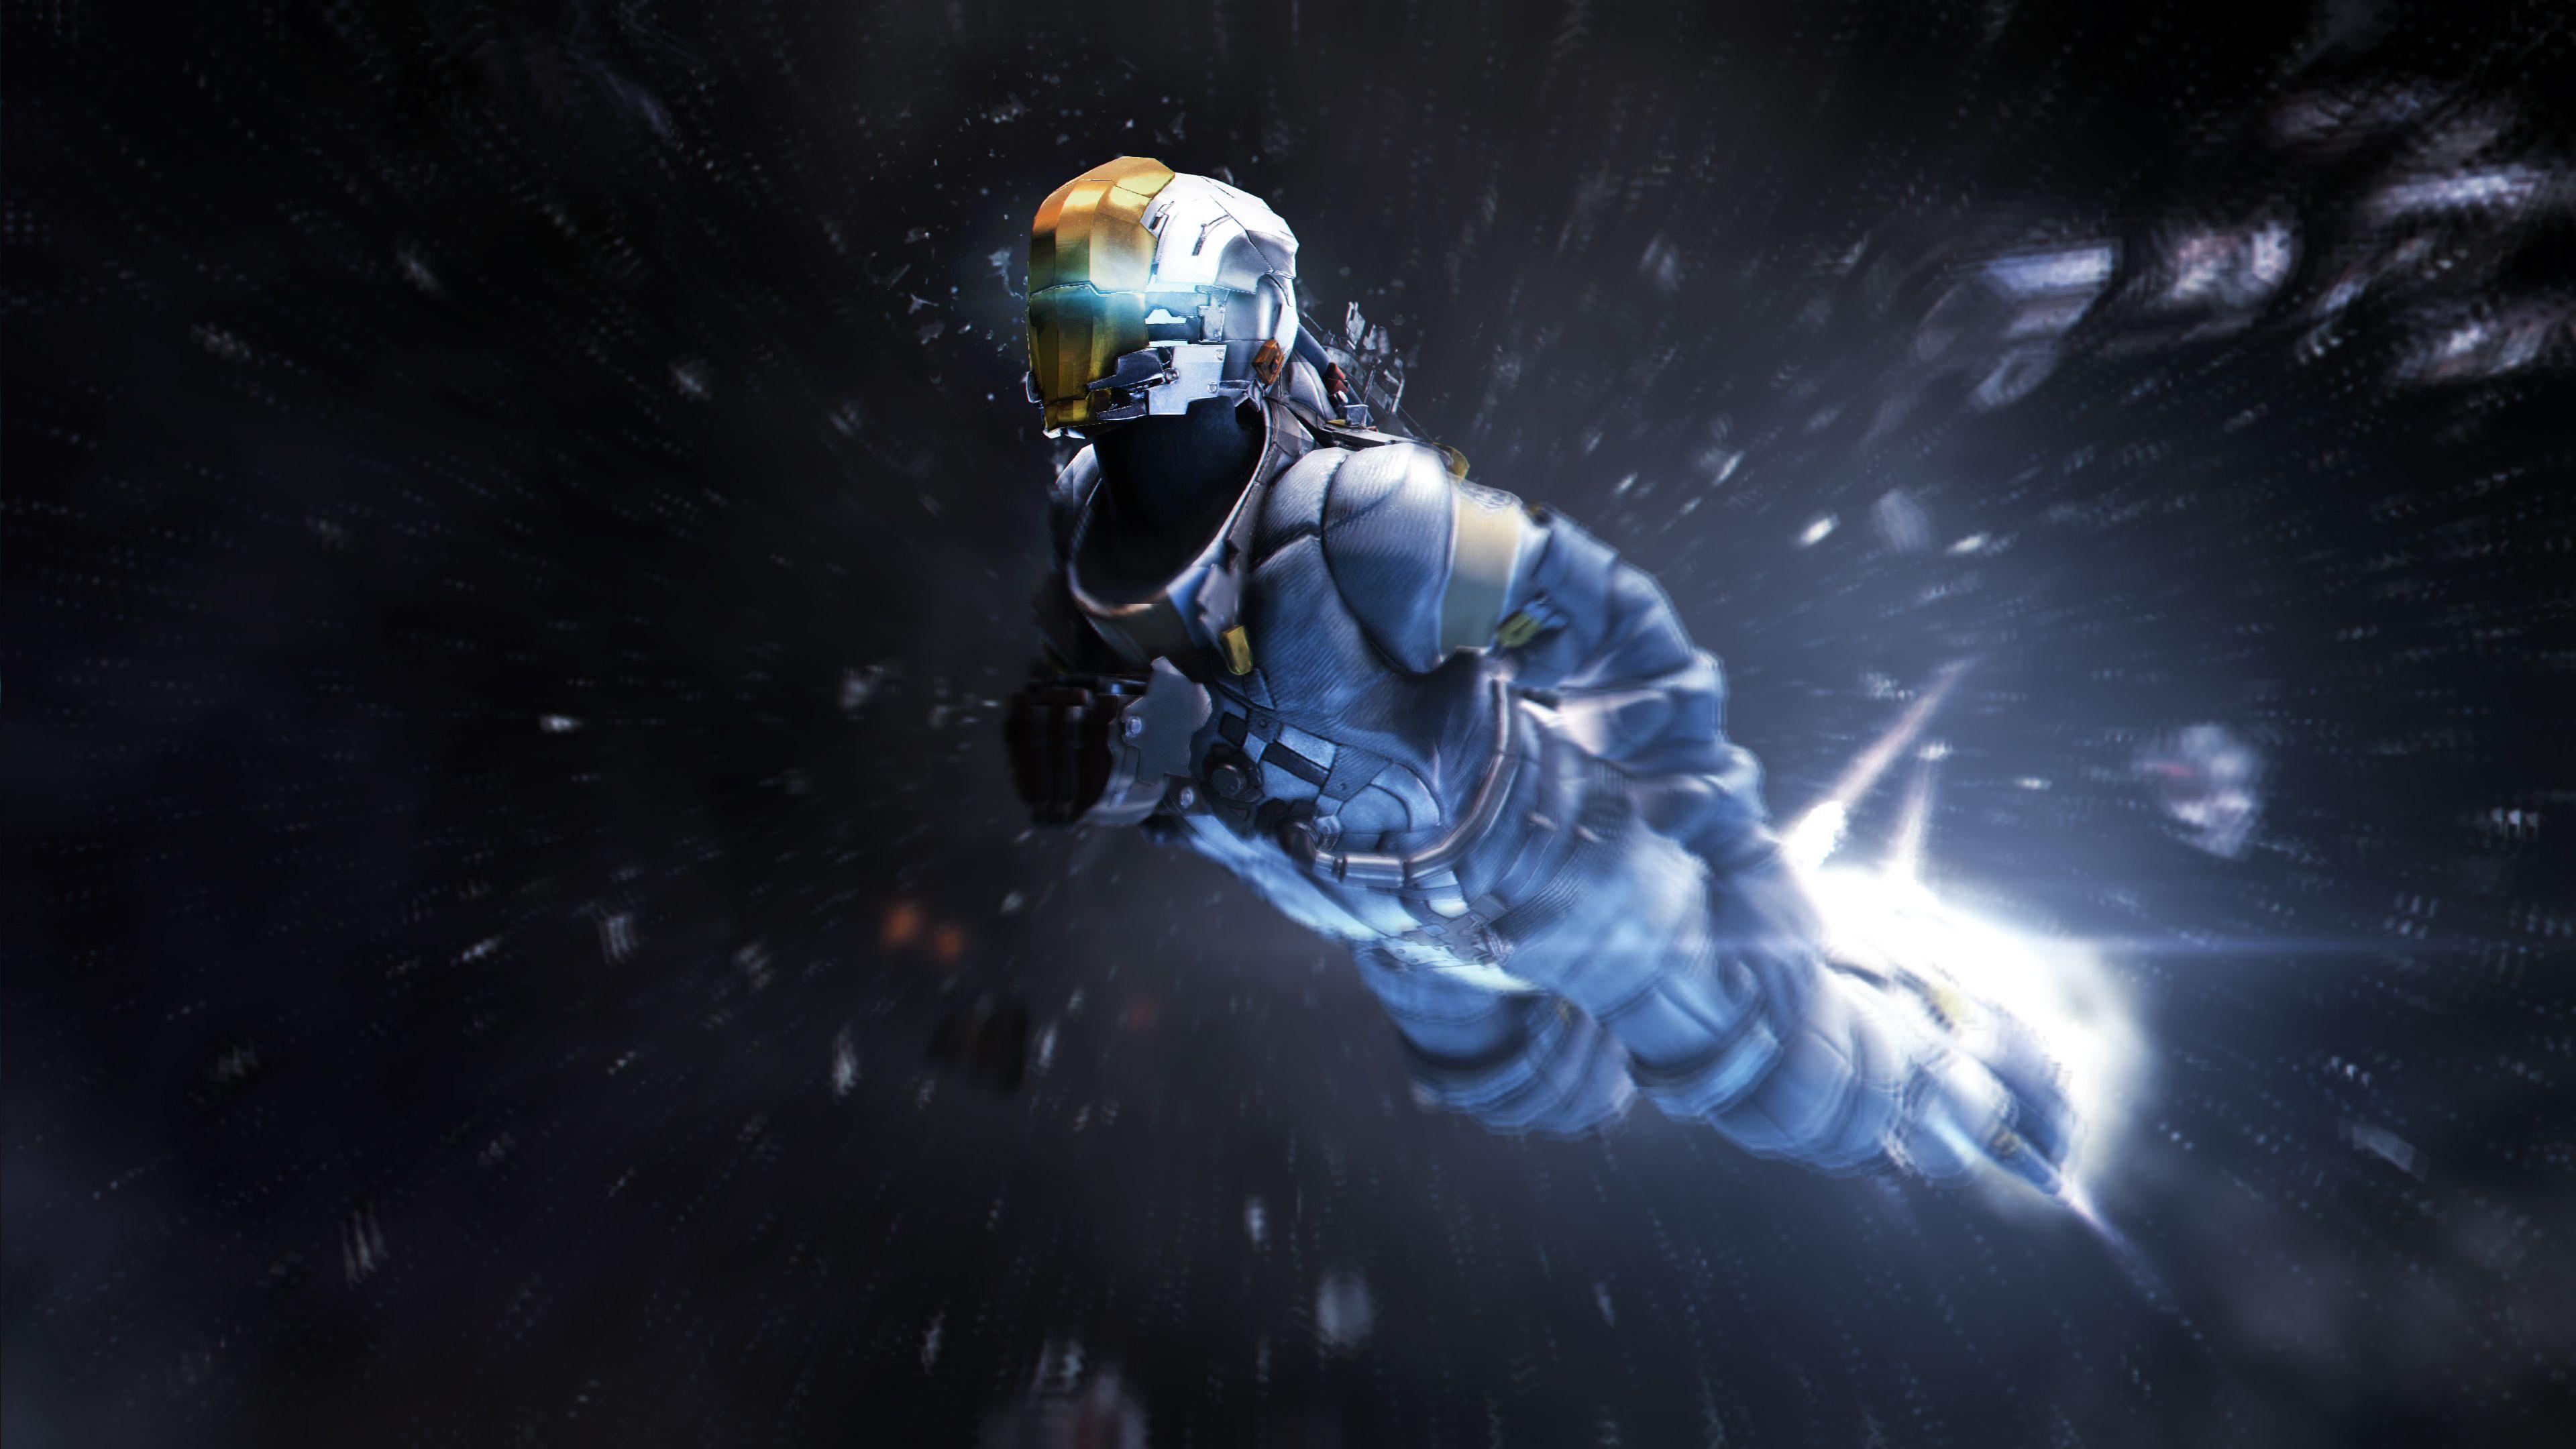 Dead Space 3 HD Wallpaper. I Have A PC